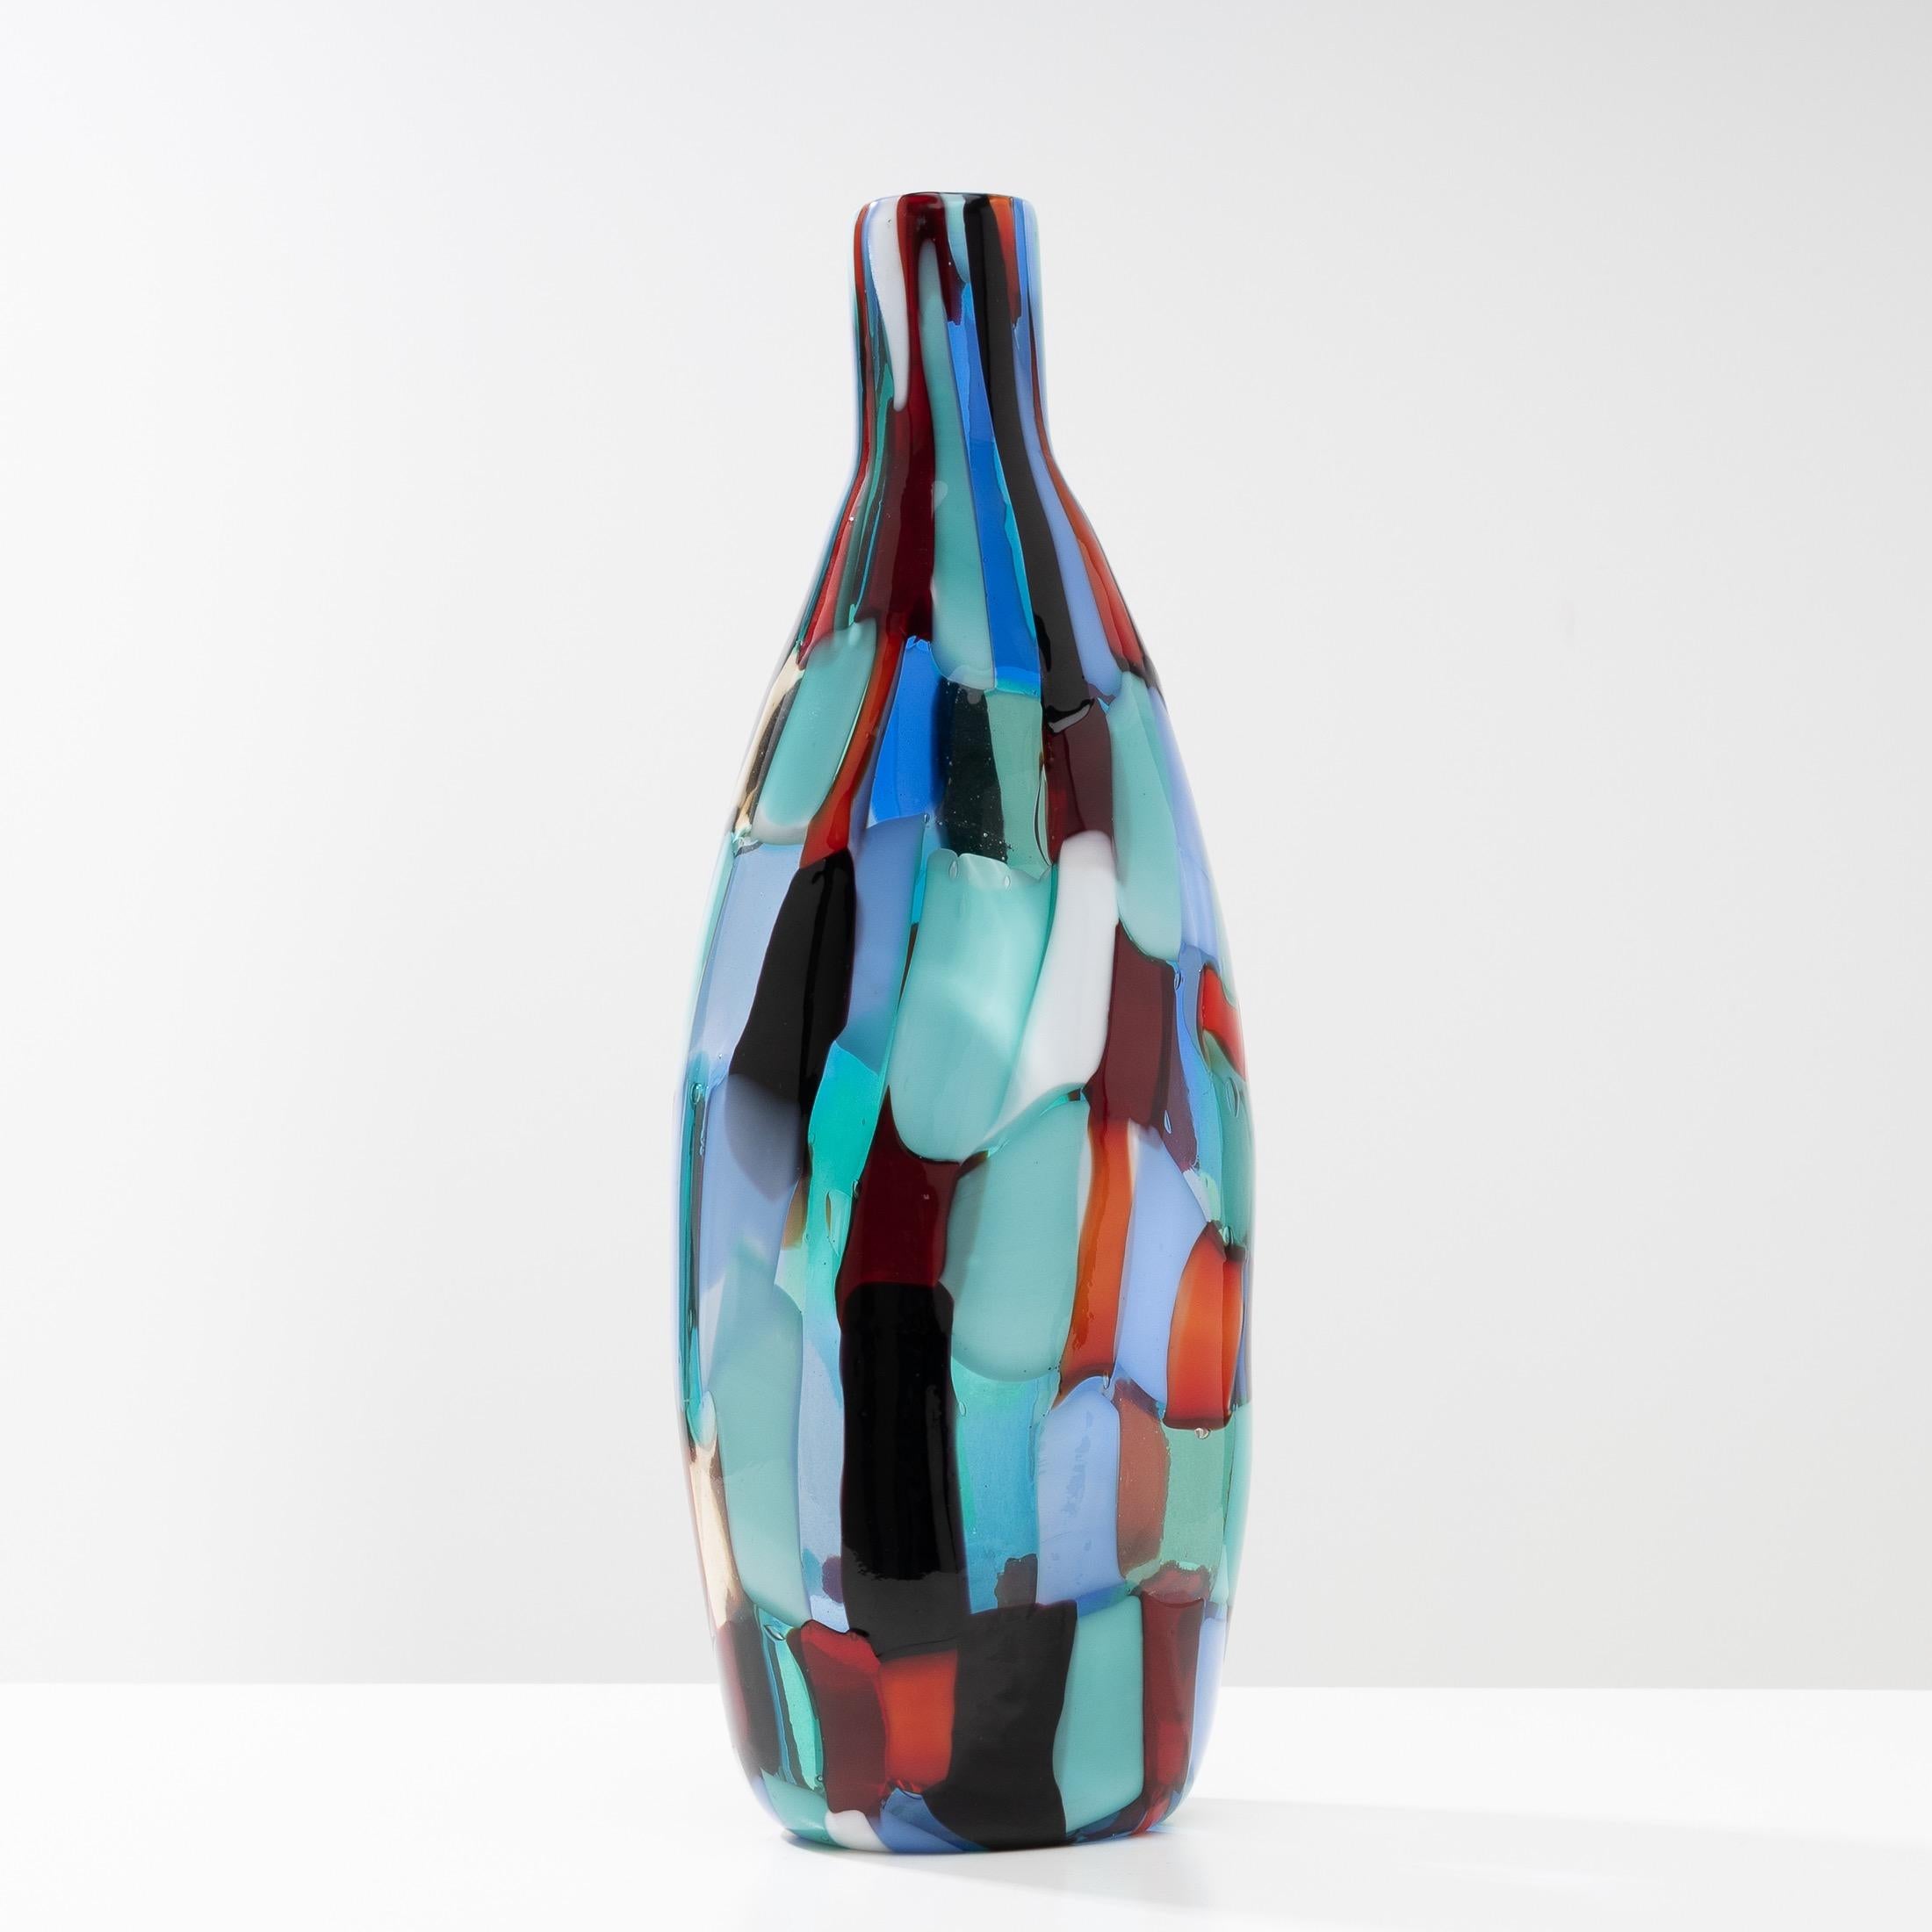 About the Pezzato arlecchino bottle shaped vase by Fulvio Bianconi
Mouth-blown vase, the model designed in 1950.
This color variant is often called “Arlecchino” by collectors. It is an arrangement of mosaics in shades of green, sapphire blue, milk